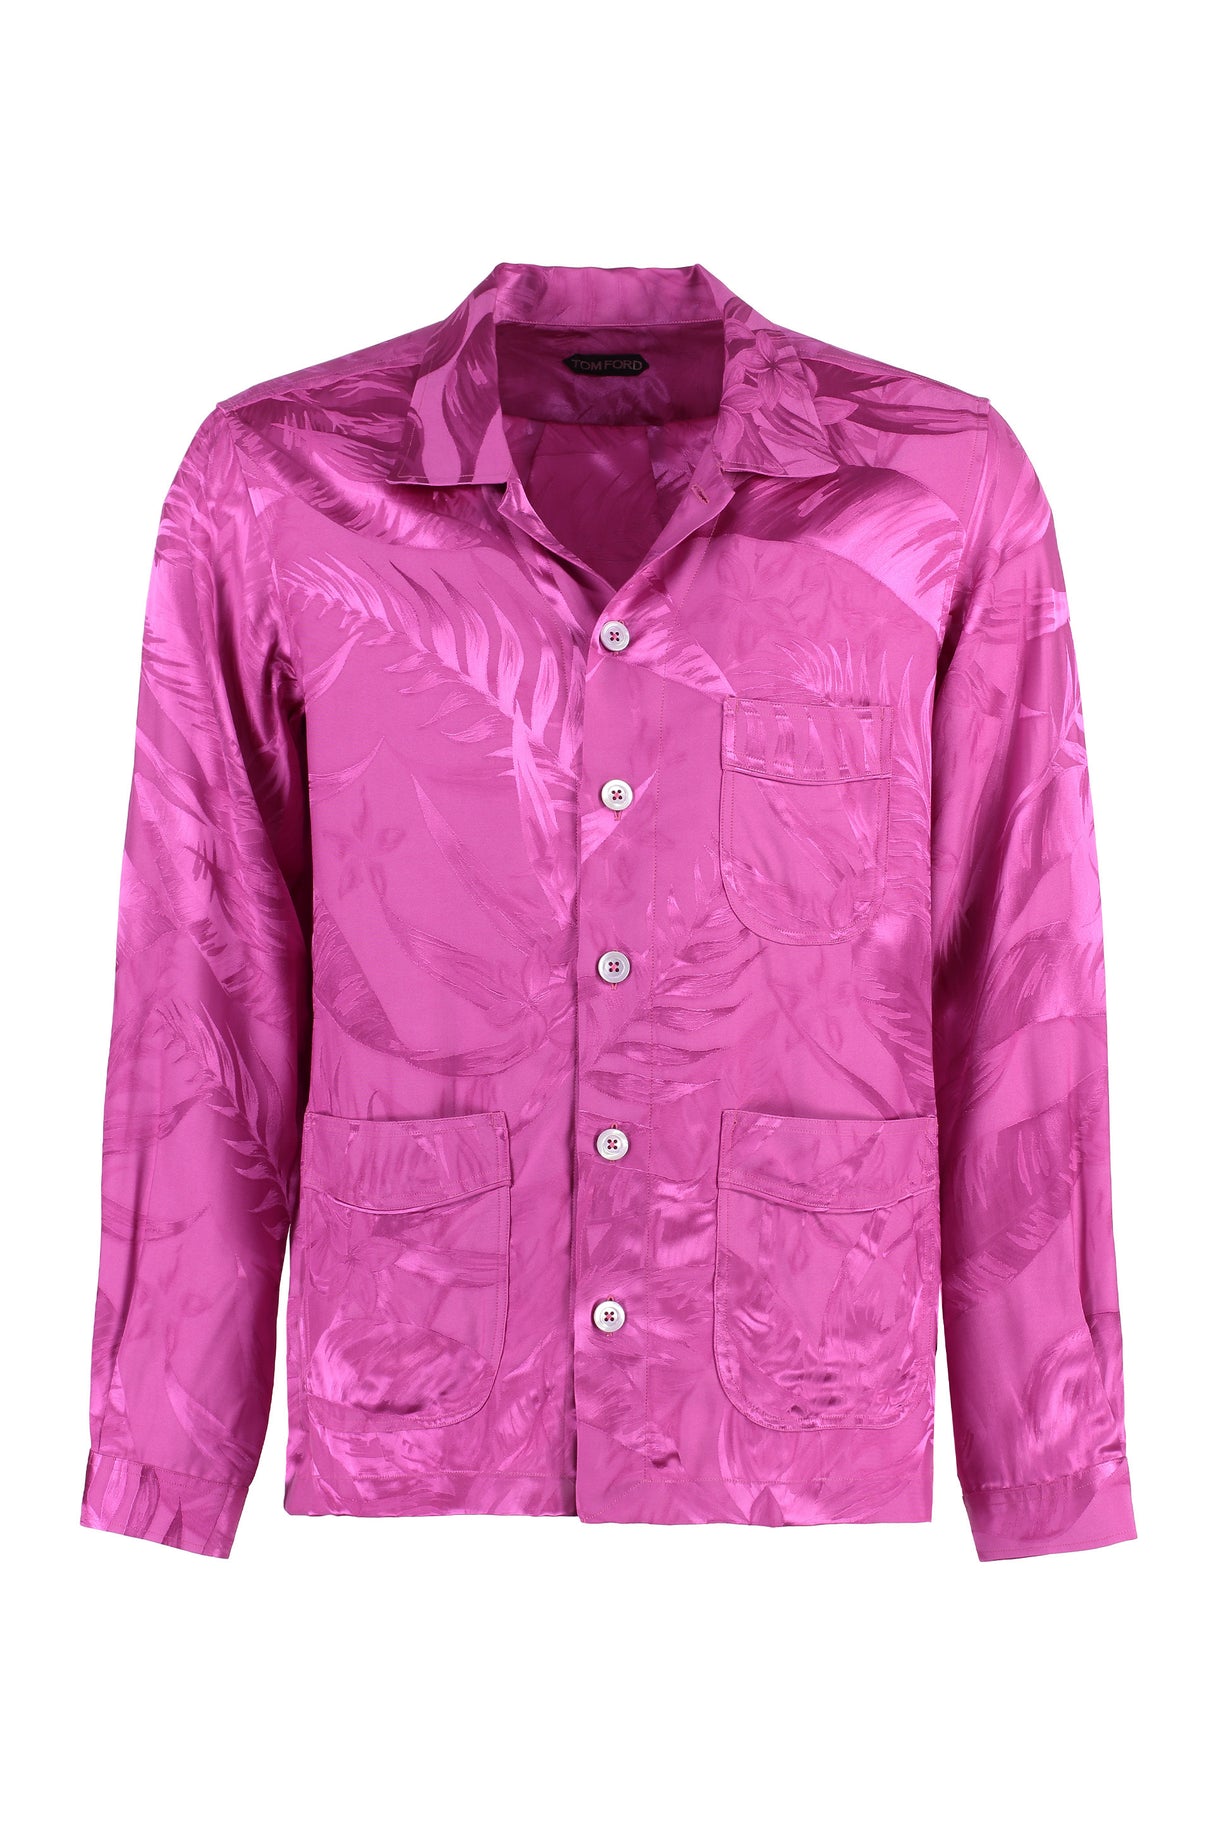 TOM FORD Men's Printed Viscose Shirt for SS23 in Pink